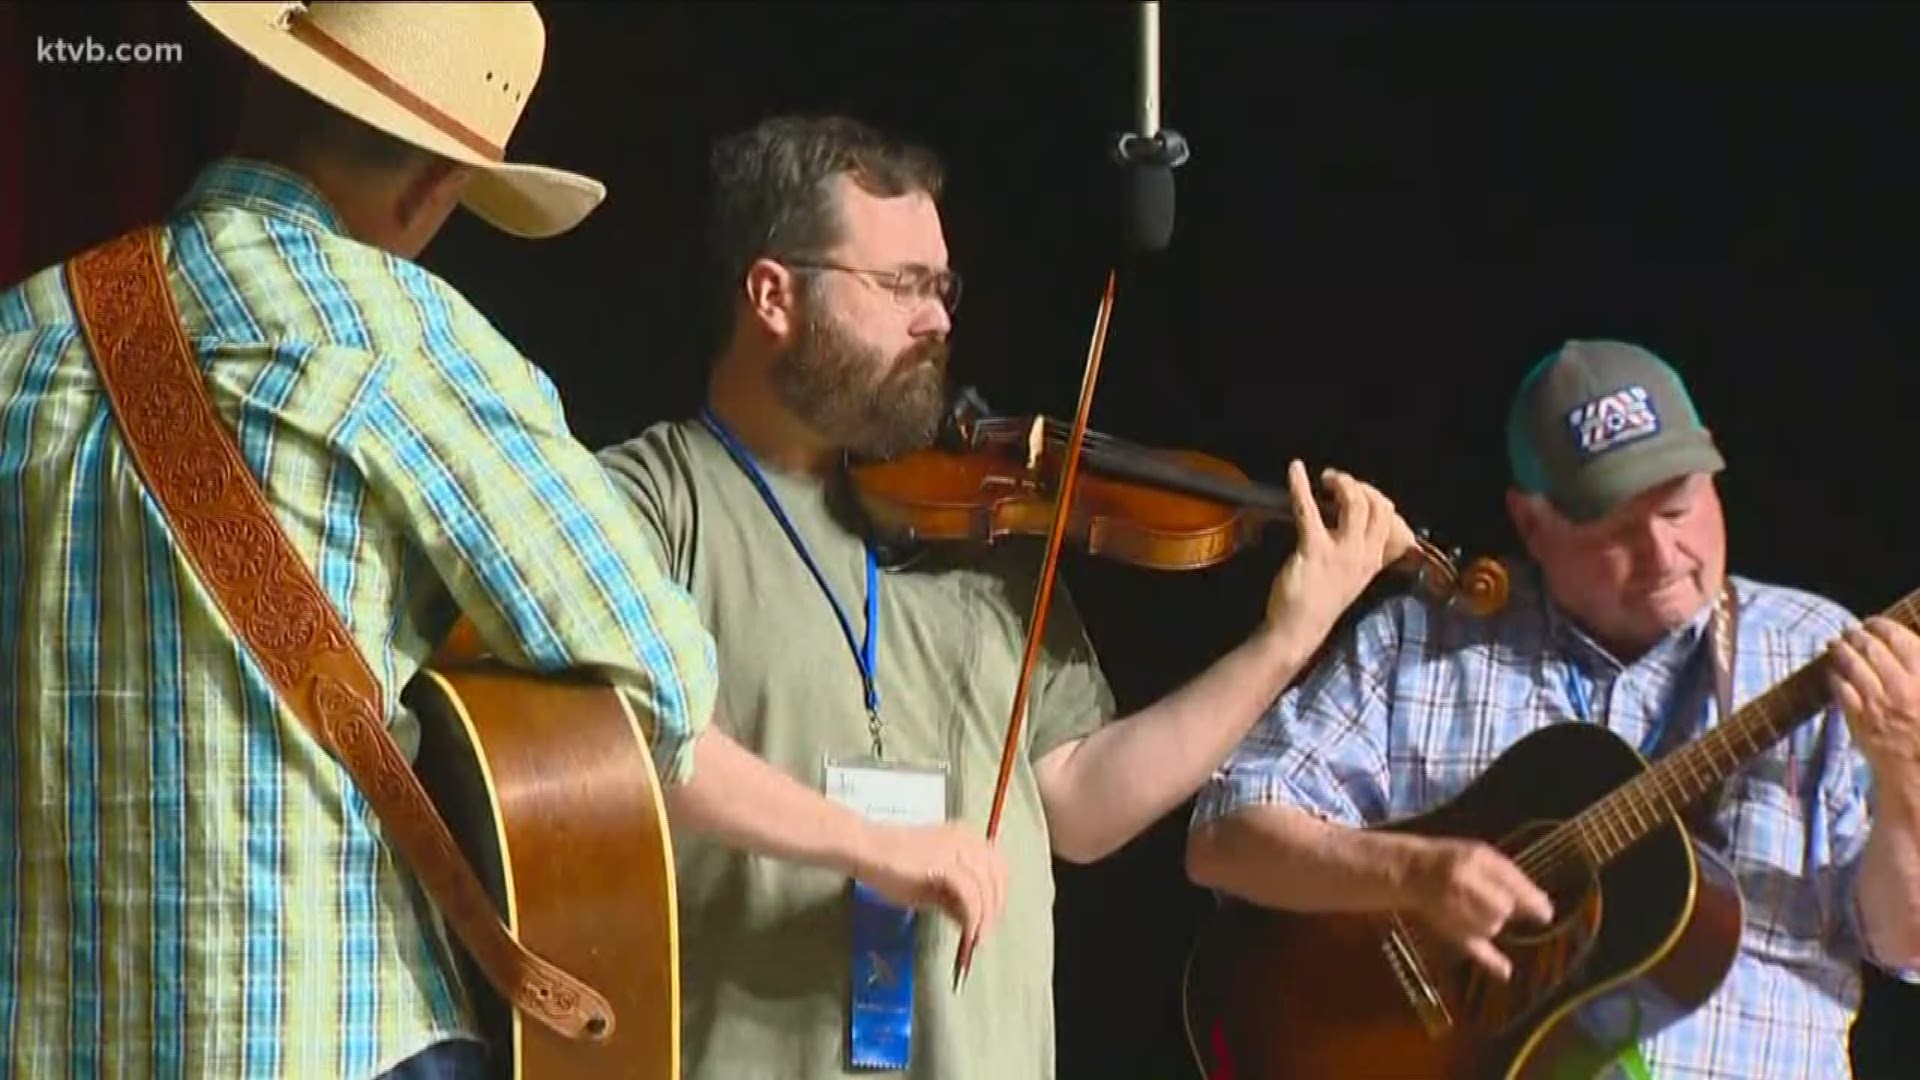 Thousands are expected to attend this year's National Oldtime Fiddlers Contest and Festival.